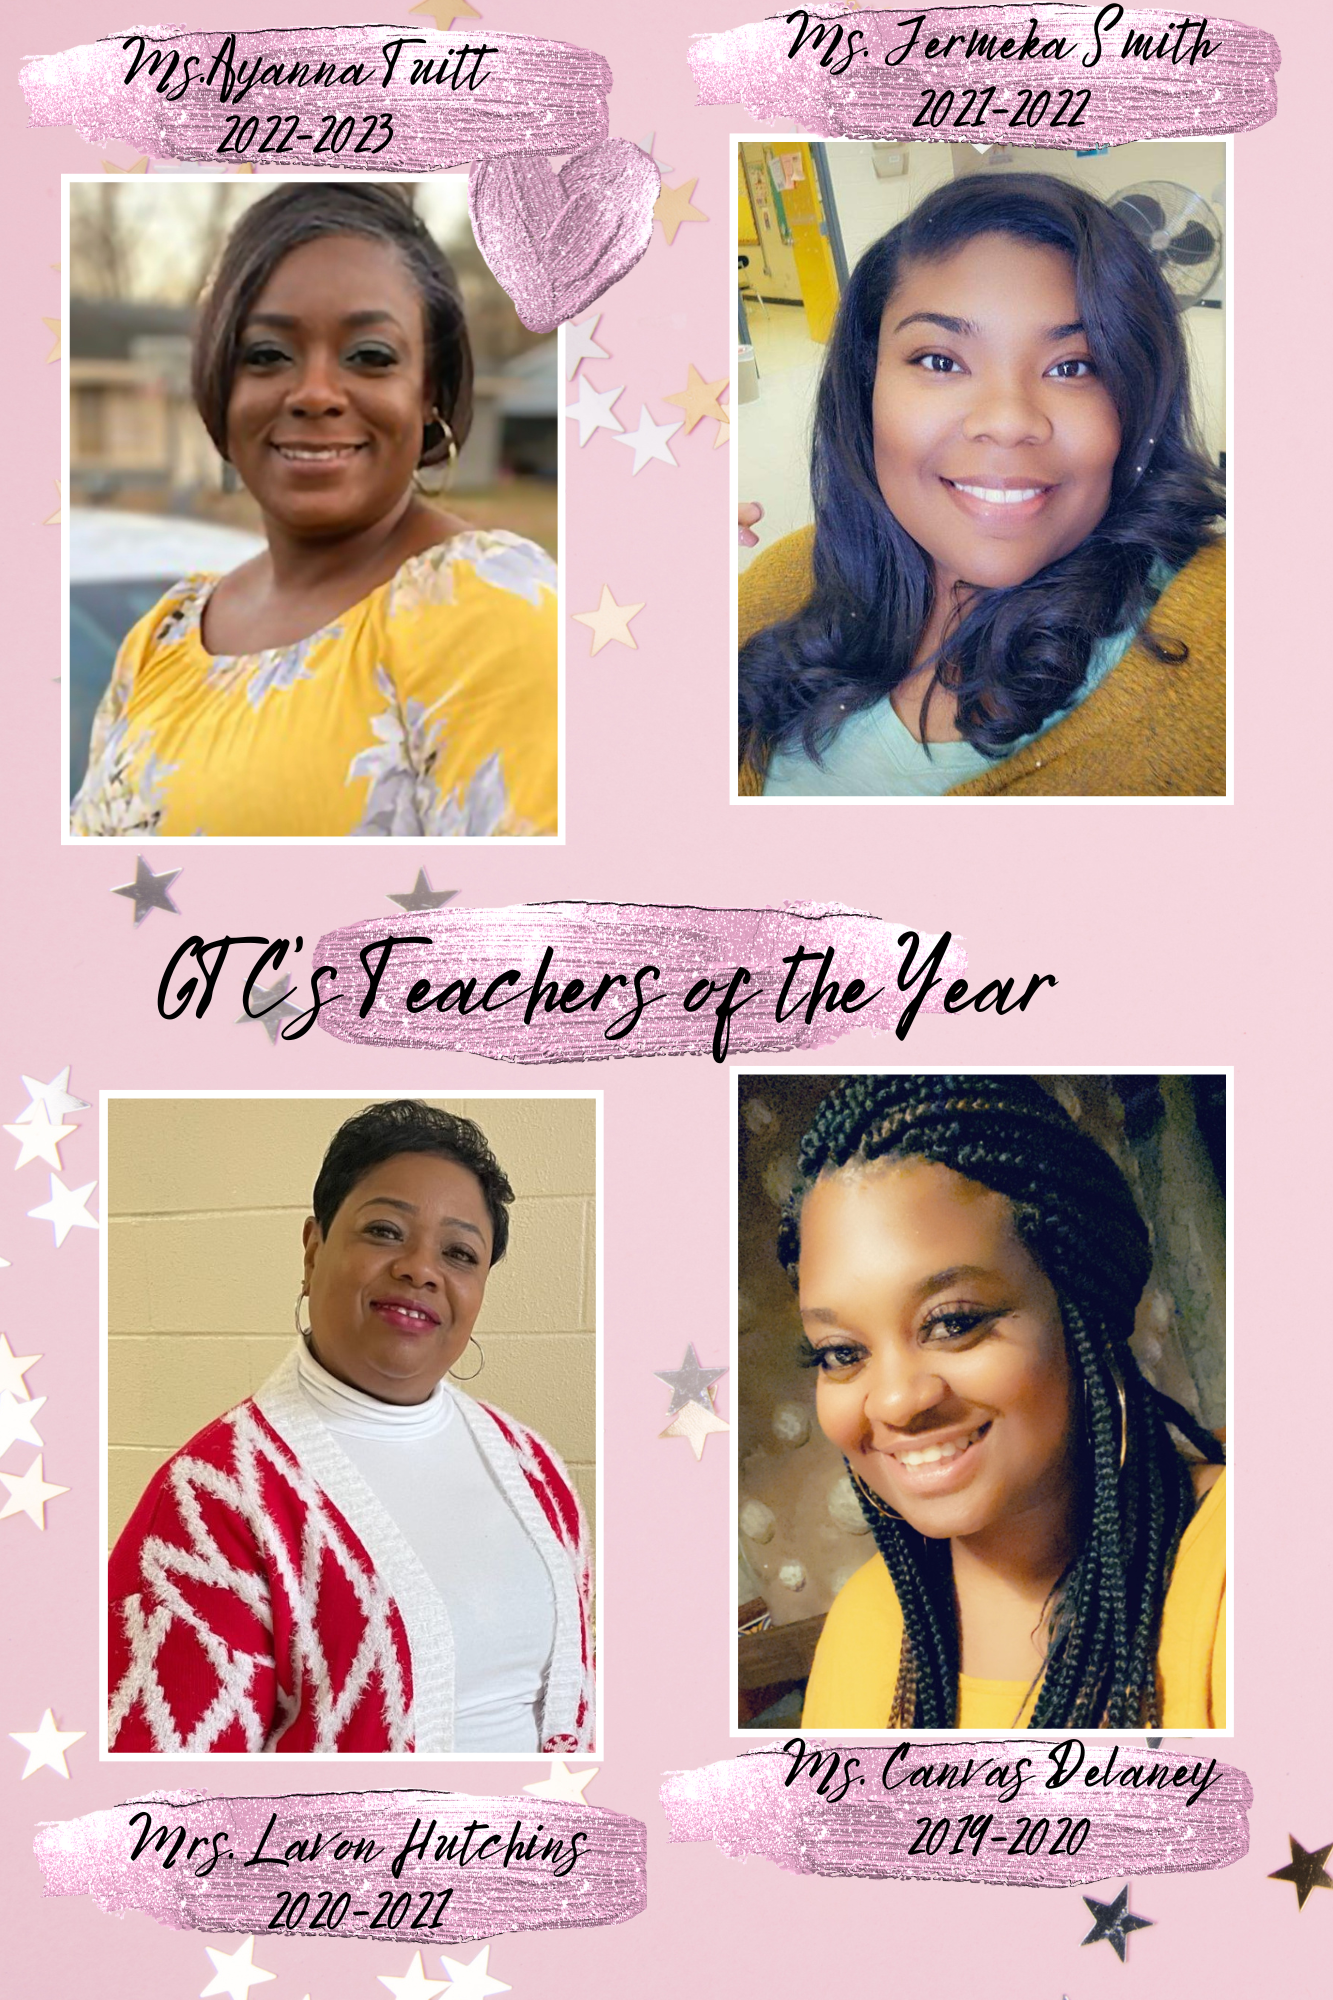 Former GTC's Teachers of the Year; Ms. Ayanna Tuitt, 2022-2023; Ms. Jermeka Smith, 2022-2021; Mrs. Lavon Hutchins, 2020-2021; Ms. Canvas Delaney, 2019-2020